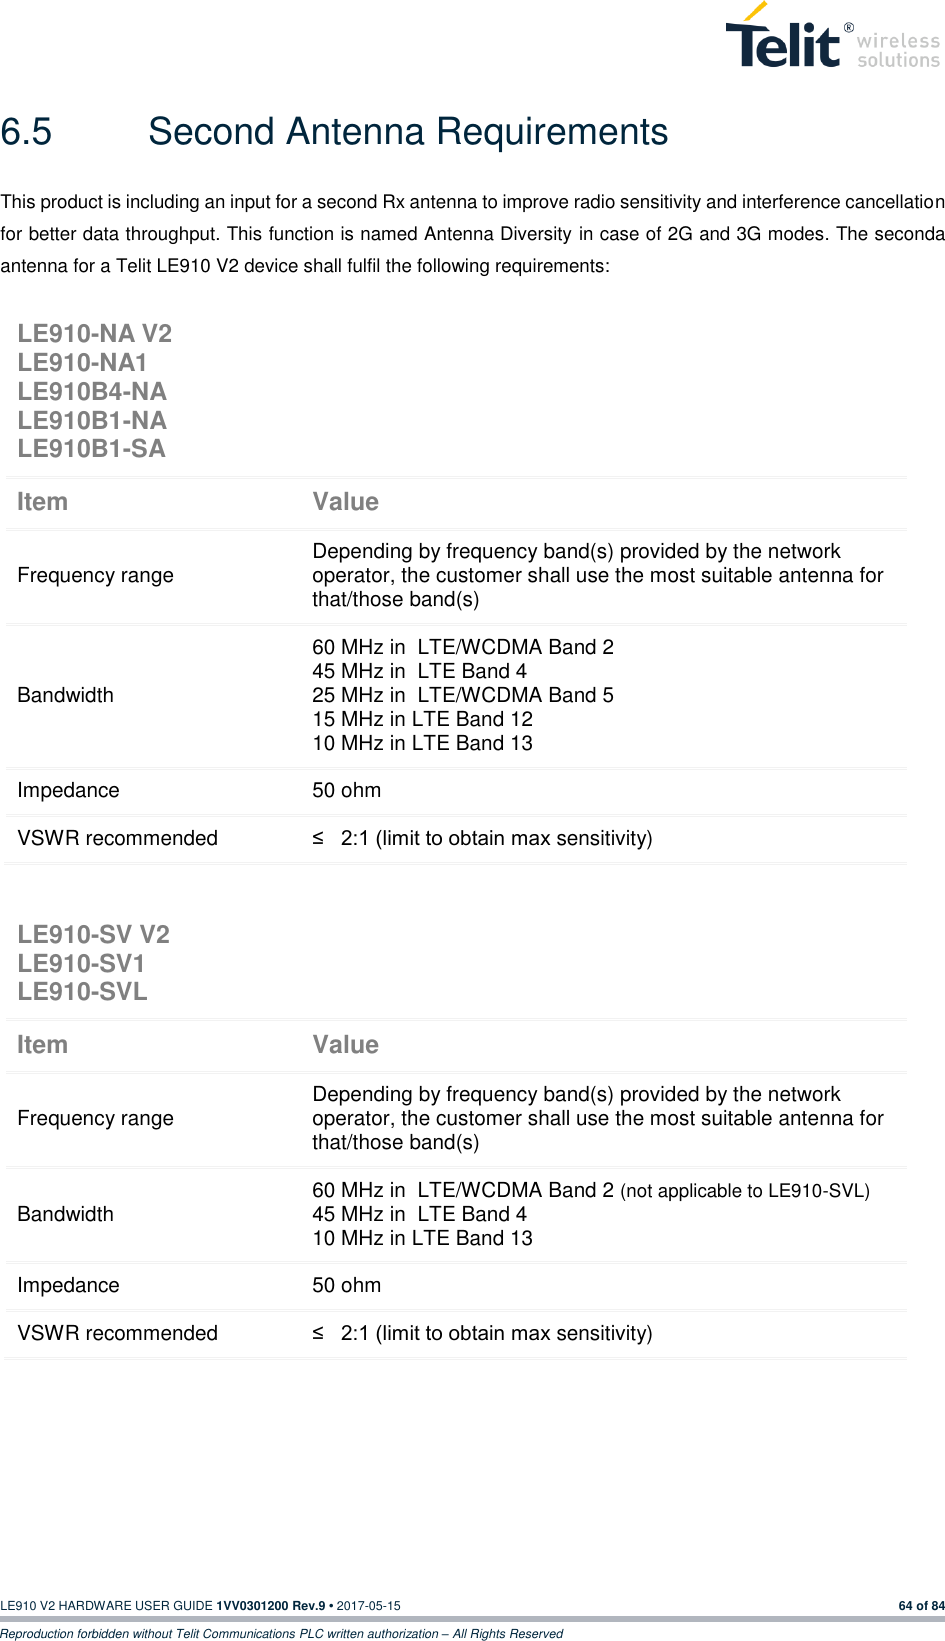   LE910 V2 HARDWARE USER GUIDE 1VV0301200 Rev.9 • 2017-05-15 64 of 84 Reproduction forbidden without Telit Communications PLC written authorization – All Rights Reserved 6.5  Second Antenna Requirements This product is including an input for a second Rx antenna to improve radio sensitivity and interference cancellation for better data throughput. This function is named Antenna Diversity in case of 2G and 3G modes. The seconda antenna for a Telit LE910 V2 device shall fulfil the following requirements:    LE910-NA V2 LE910-NA1 LE910B4-NA LE910B1-NA LE910B1-SA  Item Value Frequency range Depending by frequency band(s) provided by the network operator, the customer shall use the most suitable antenna for that/those band(s) Bandwidth 60 MHz in  LTE/WCDMA Band 2 45 MHz in  LTE Band 4 25 MHz in  LTE/WCDMA Band 5 15 MHz in LTE Band 12 10 MHz in LTE Band 13 Impedance 50 ohm VSWR recommended ≤   2:1 (limit to obtain max sensitivity) LE910-SV V2 LE910-SV1 LE910-SVL  Item Value Frequency range Depending by frequency band(s) provided by the network operator, the customer shall use the most suitable antenna for that/those band(s) Bandwidth 60 MHz in  LTE/WCDMA Band 2 (not applicable to LE910-SVL) 45 MHz in  LTE Band 4 10 MHz in LTE Band 13 Impedance 50 ohm VSWR recommended ≤   2:1 (limit to obtain max sensitivity) 